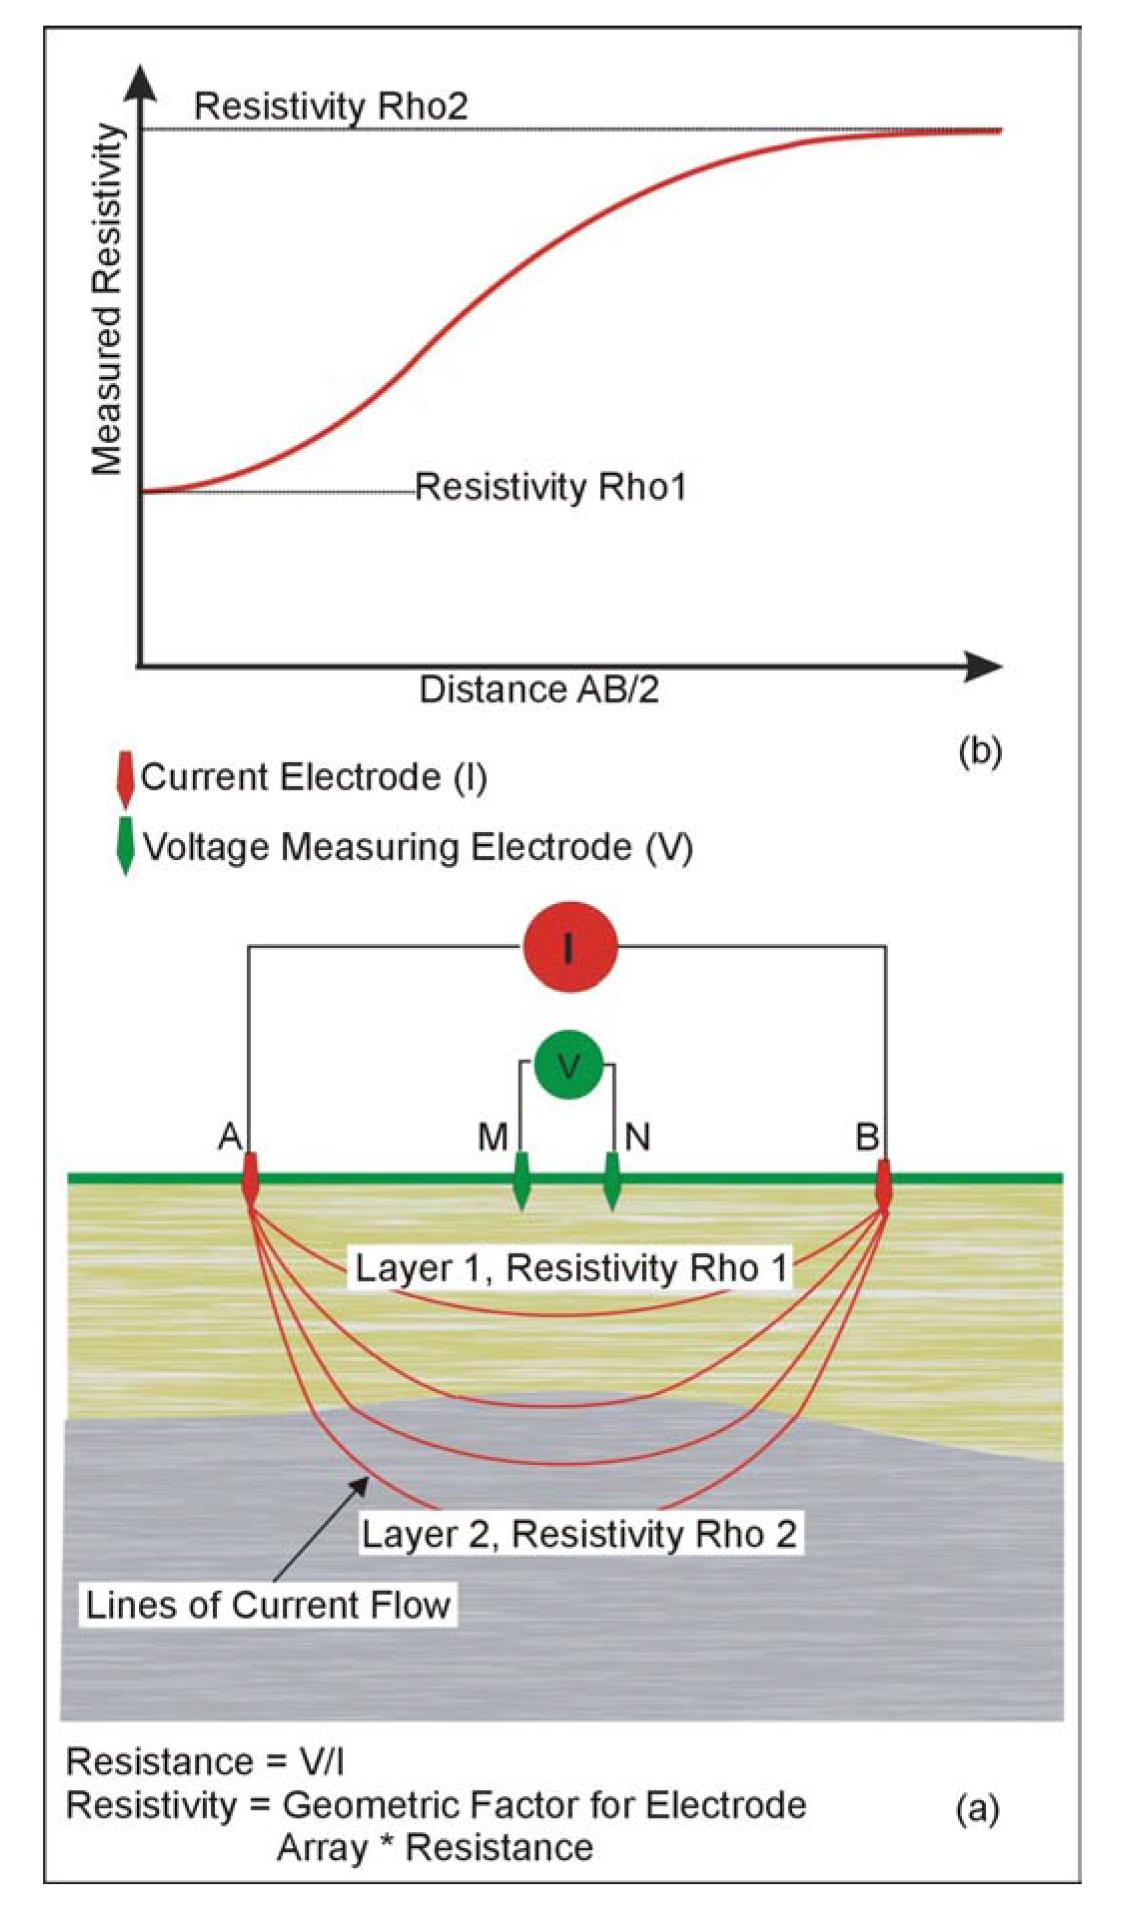 Electrode array for (a) measuring the resistivity of the ground, and (b) a resistivity sounding curve.